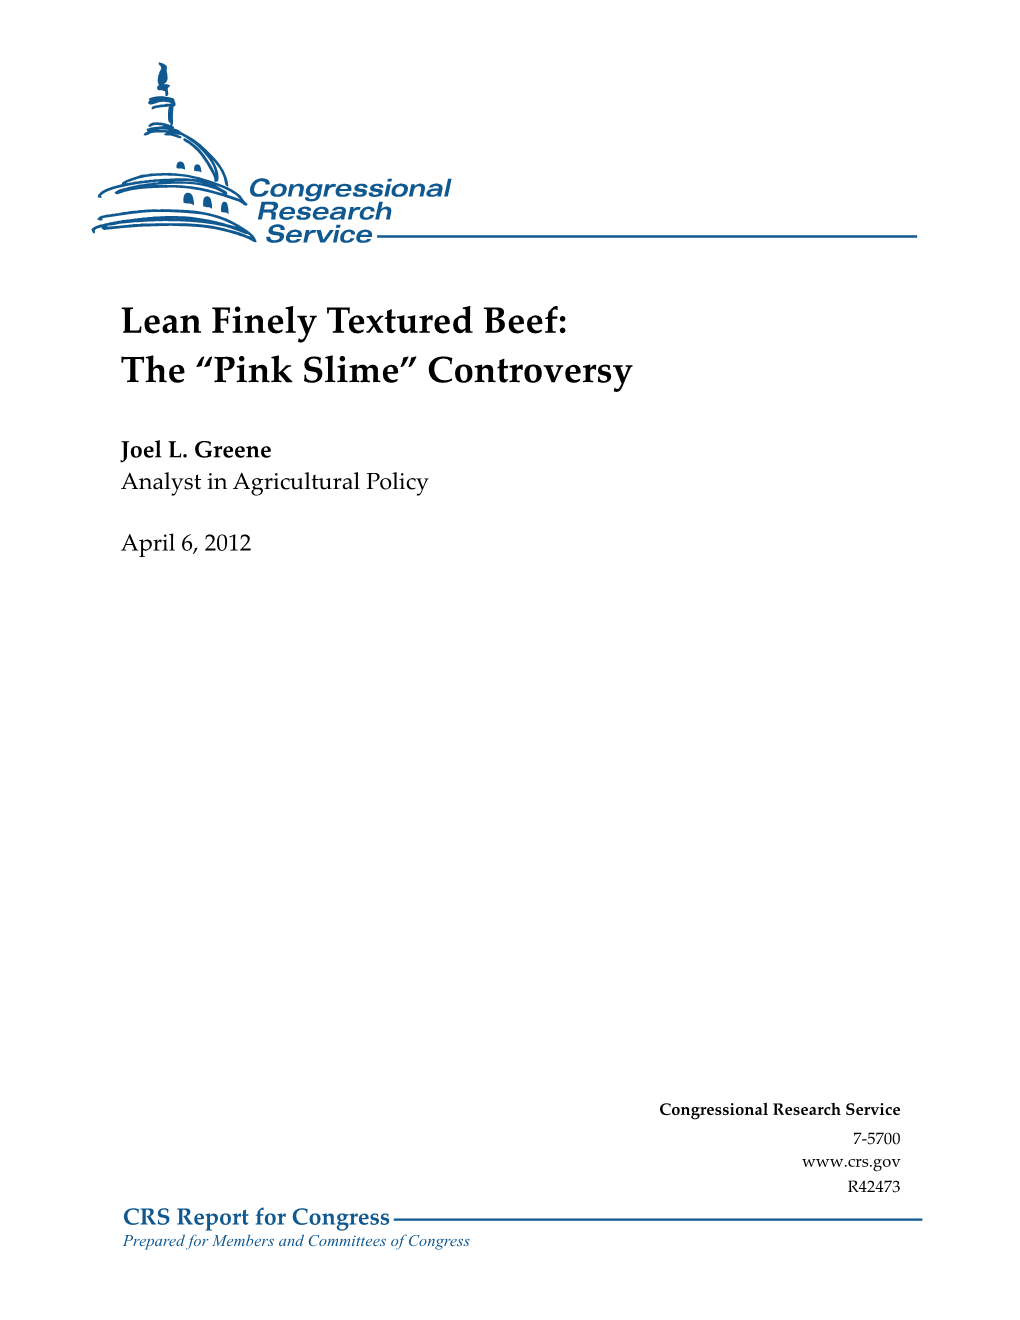 Lean Finely Textured Beef: the “Pink Slime” Controversy